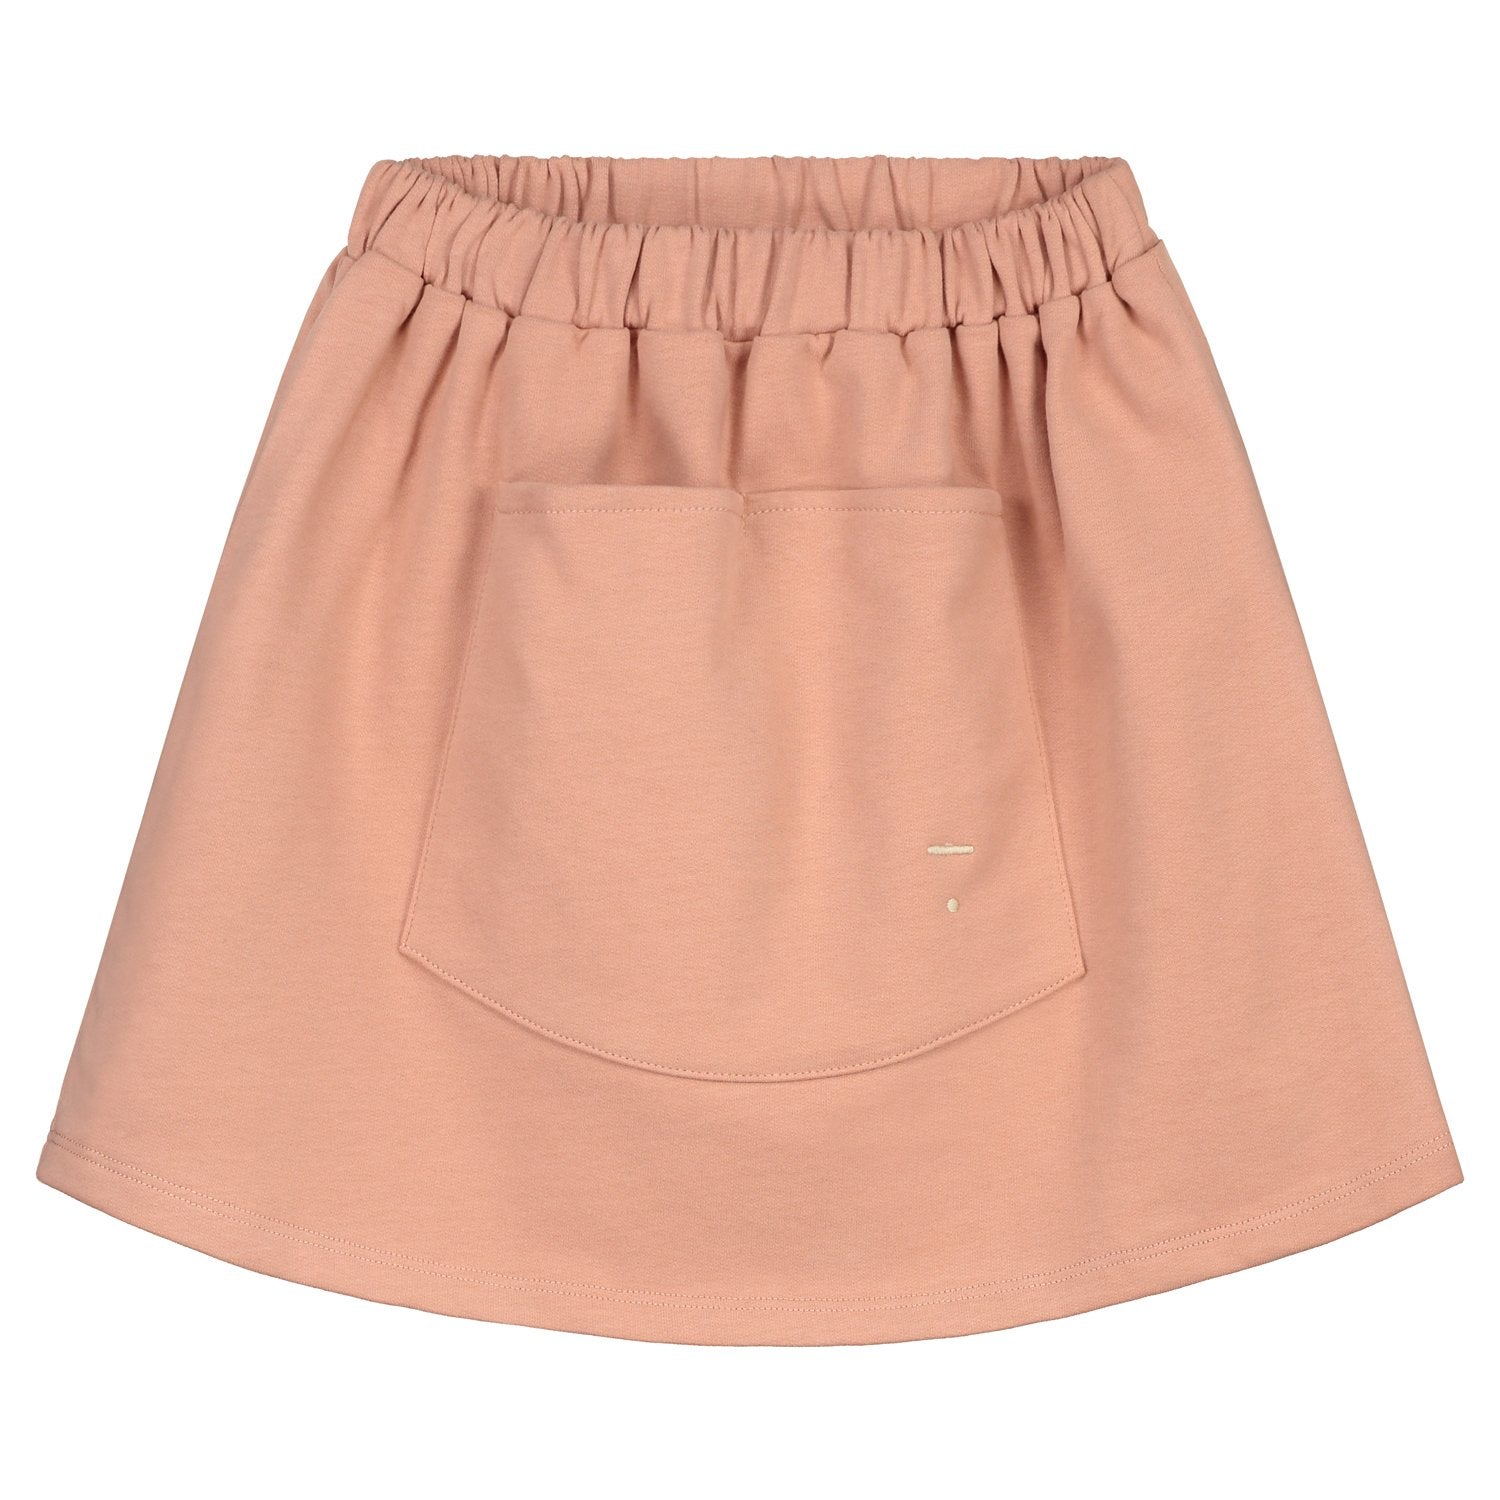 GRAY LABEL FRONT POCKET SKIRT / RUSTIC CLAY